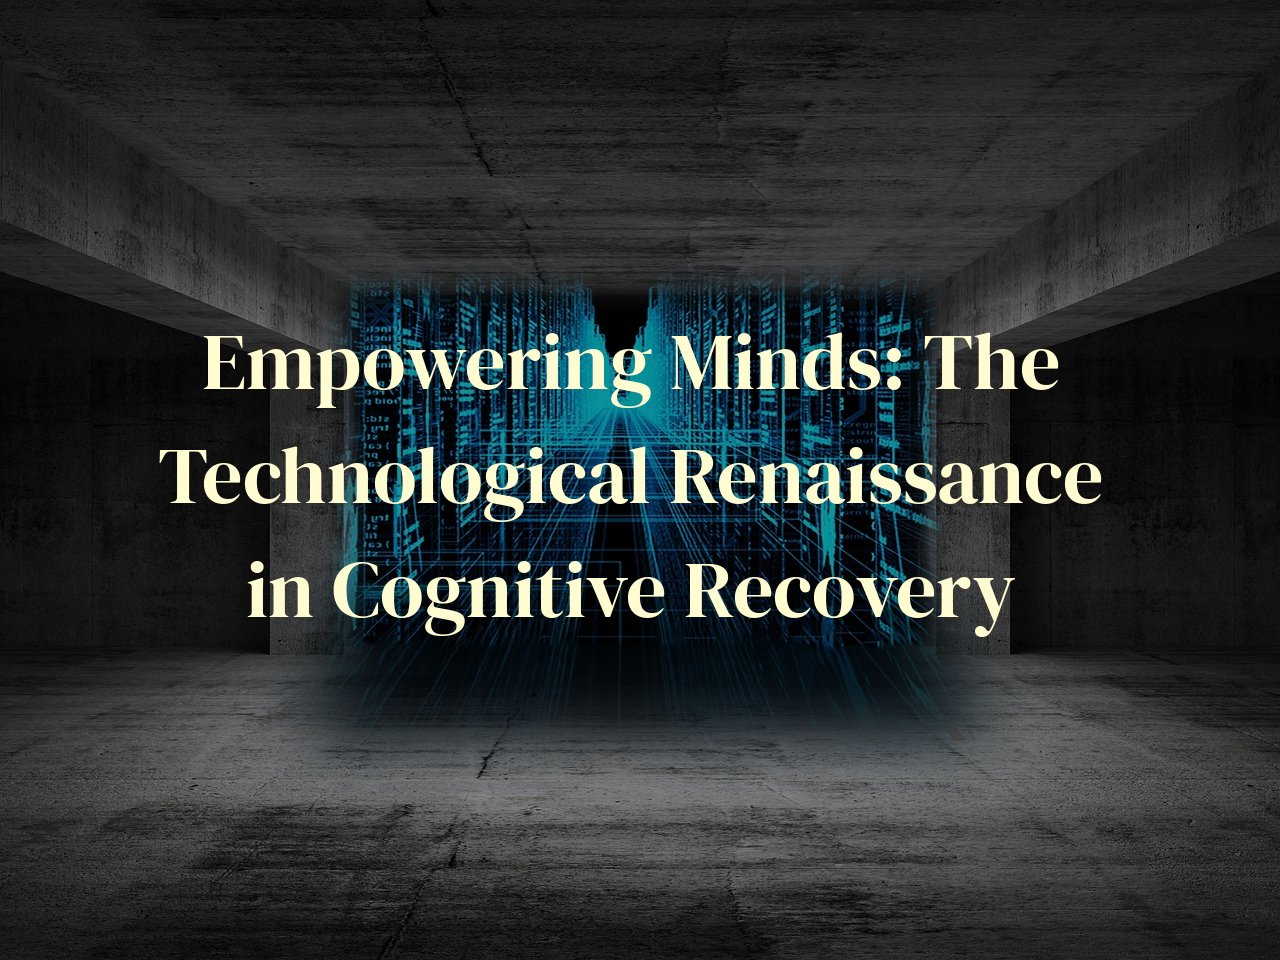 Empowering Minds: The Technological Renaissance in Cognitive Recovery